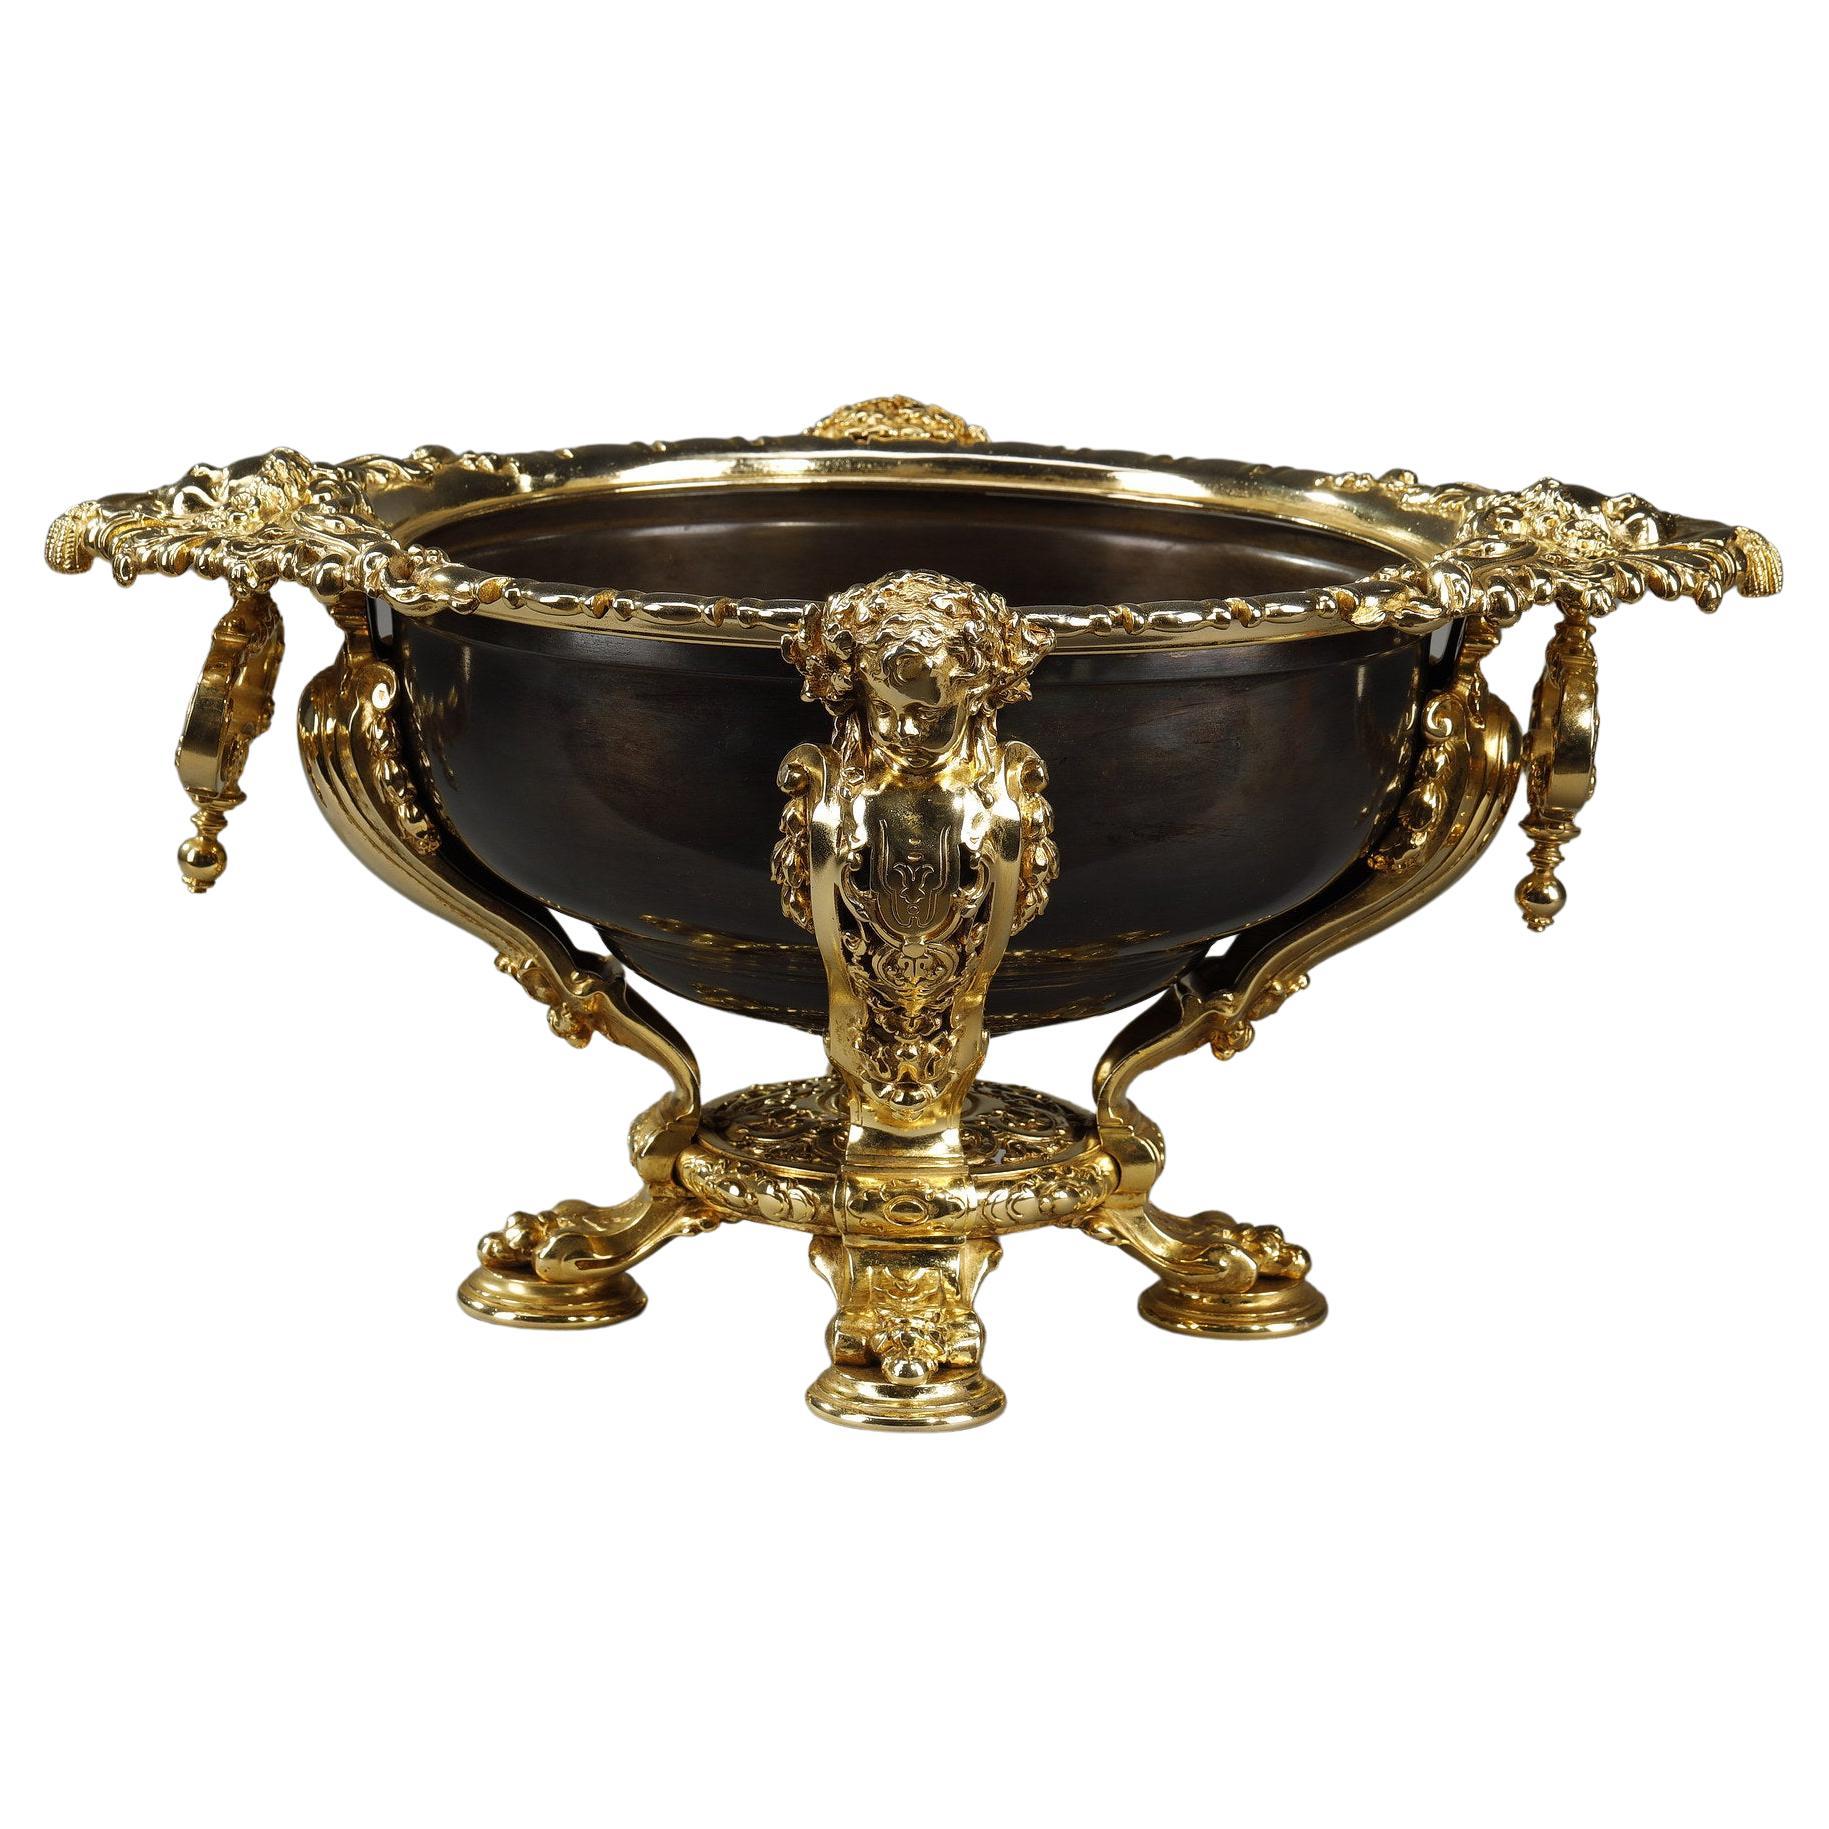 Gilded and Patinated Bronze Bowl, Late 19th Century